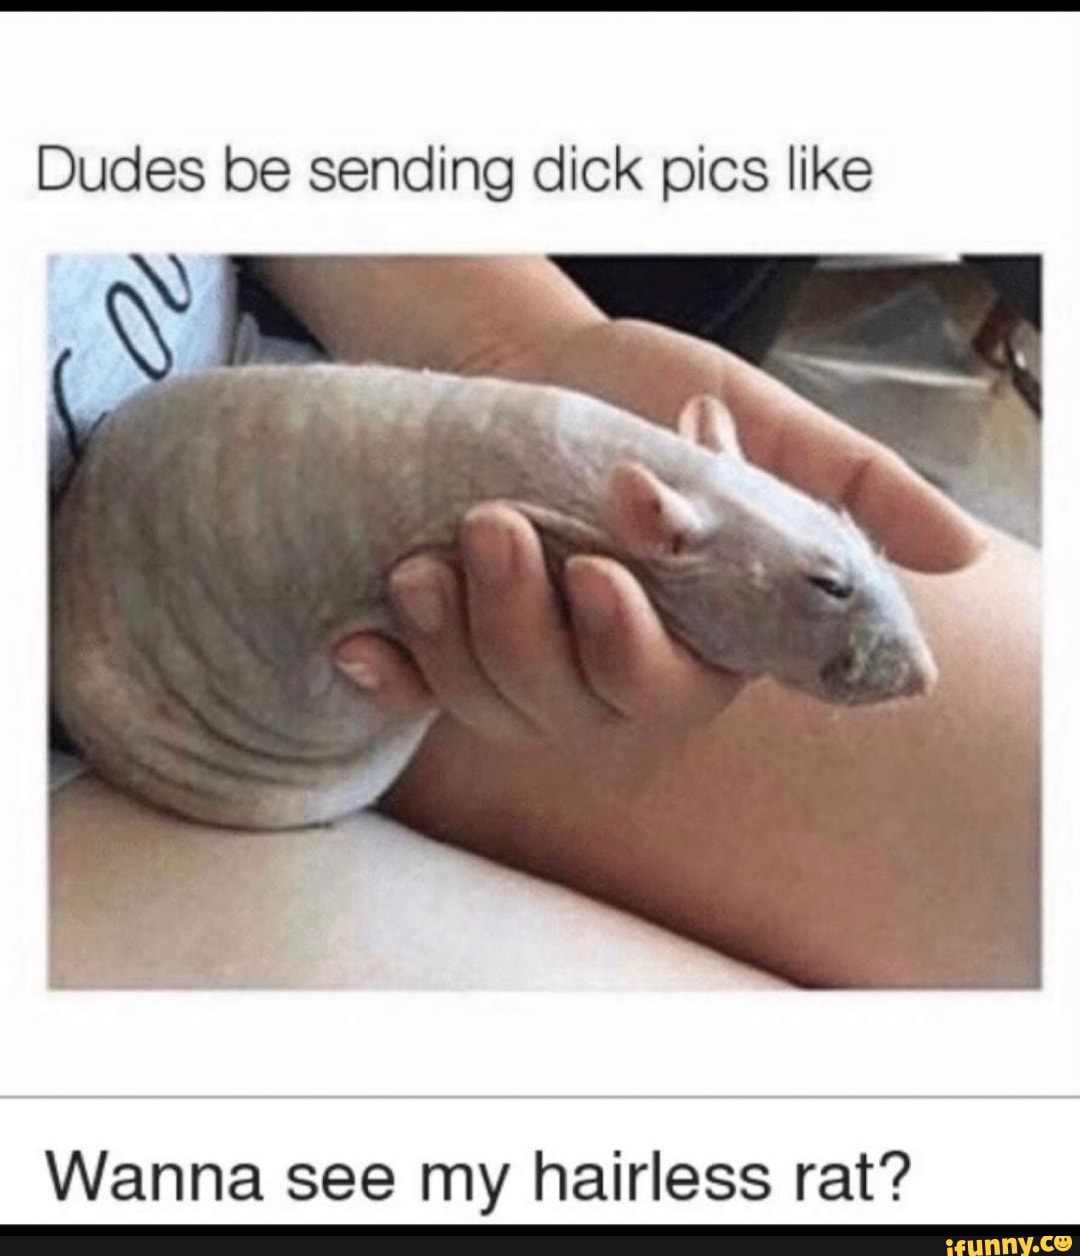 Why do men like to send dick pics